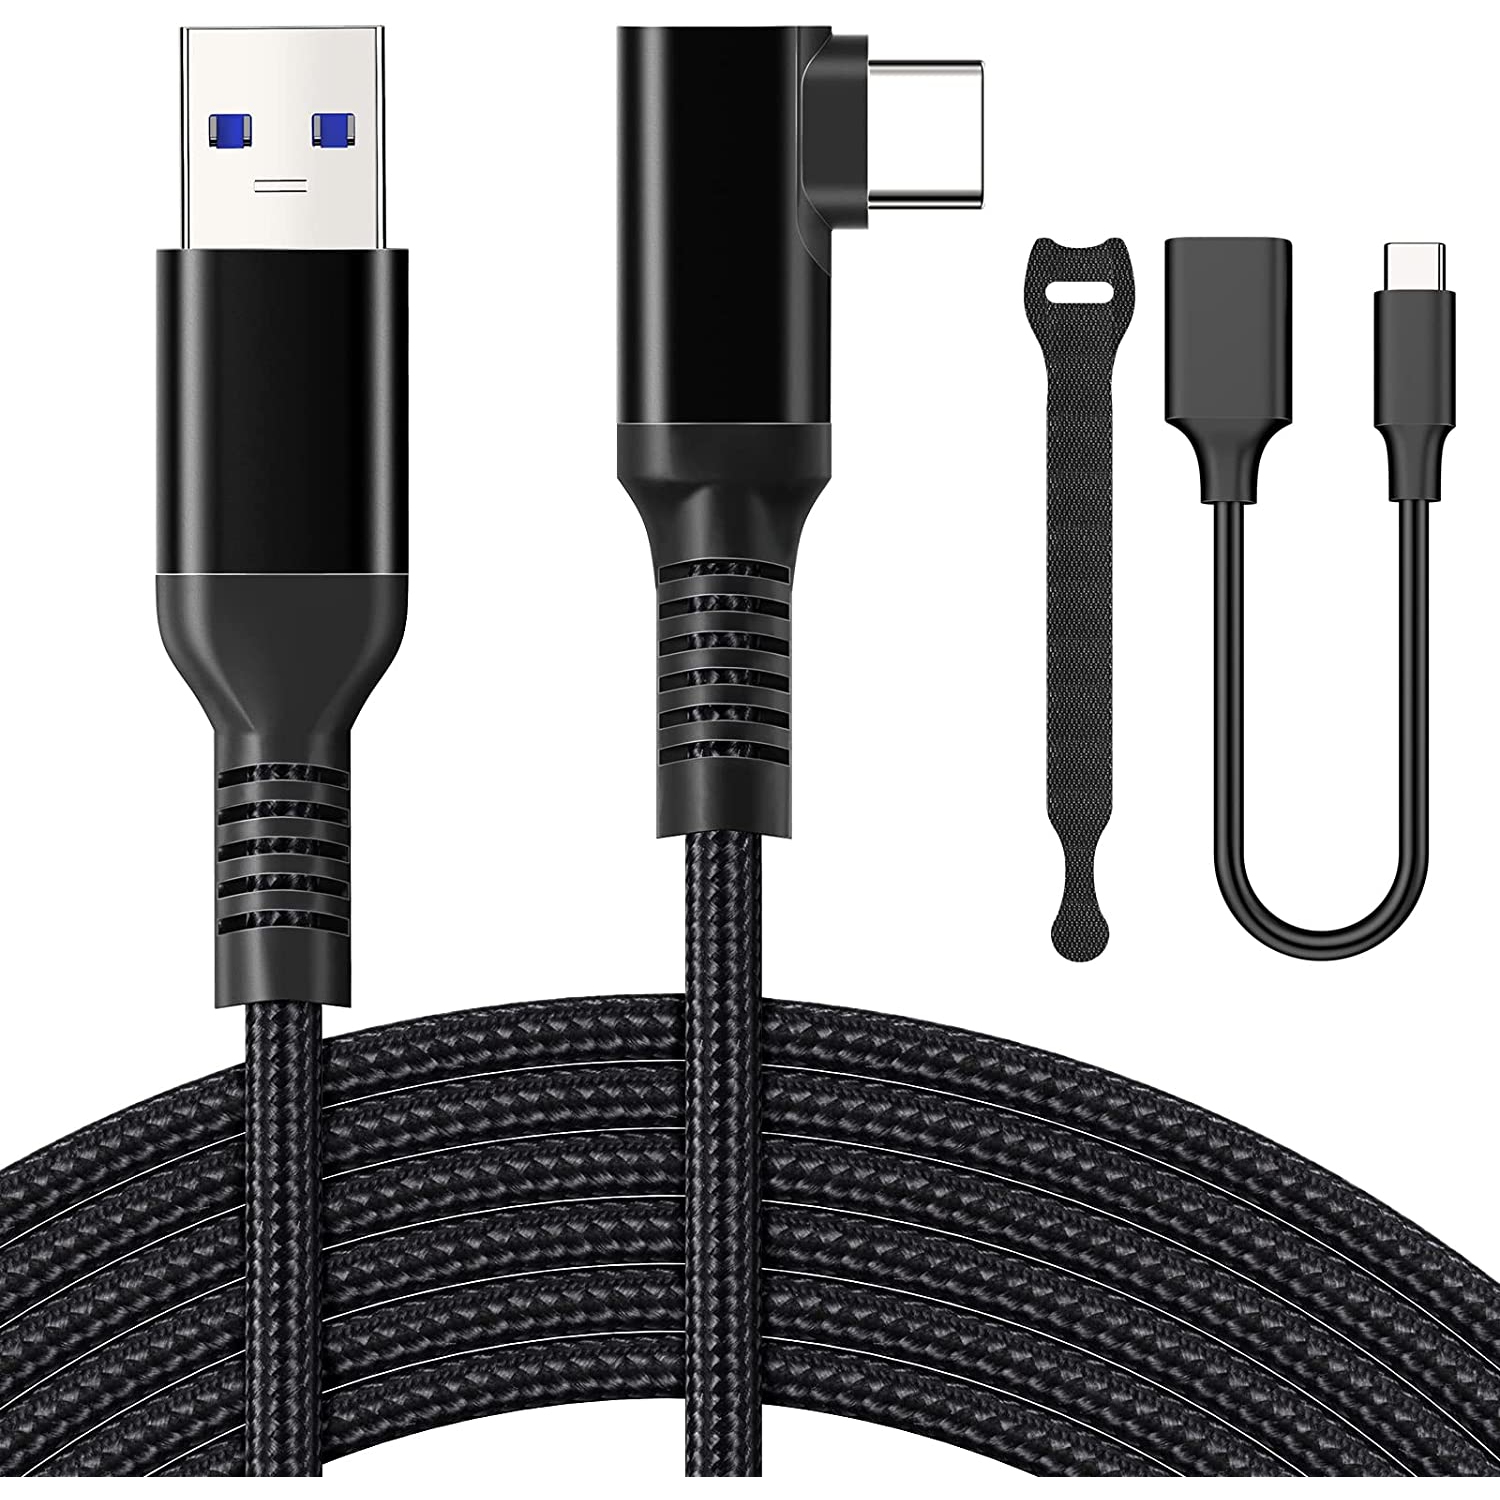 Oculus Quest 2 Link Cable 5M USB C to USB 3.0 Charging Cable for Meta VR Quest 1/2, Gaming PC, Steam VR, with USB C